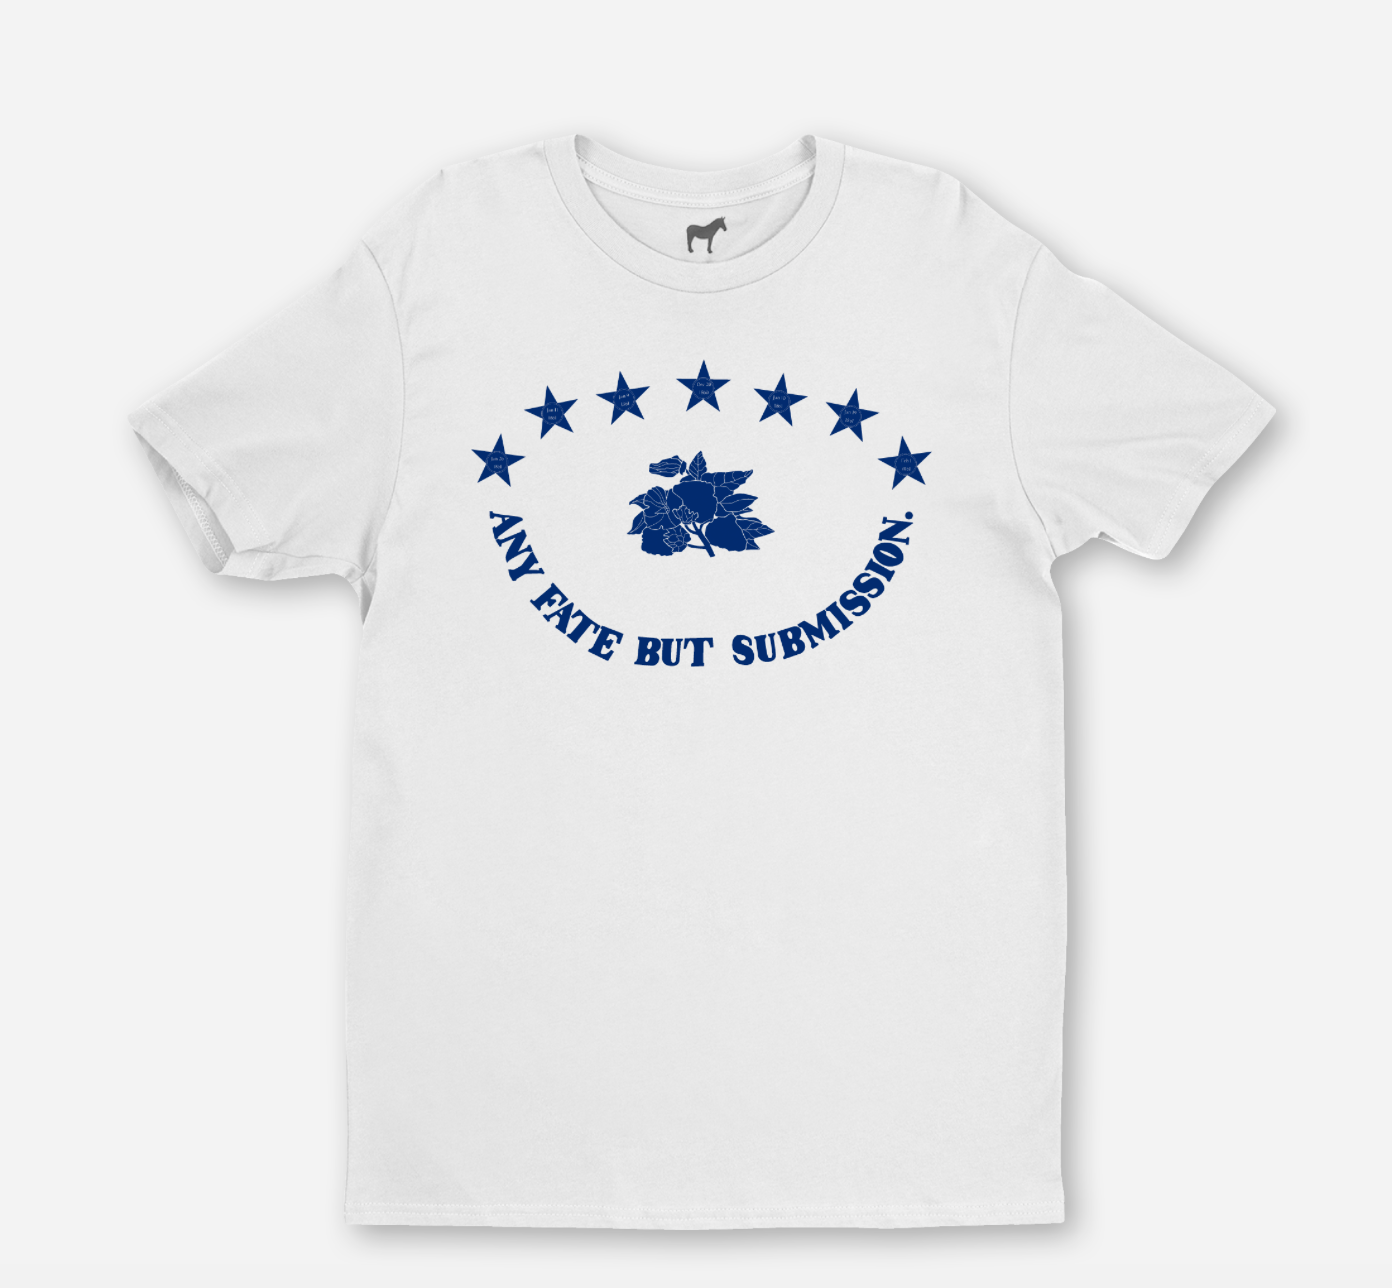 3rd Florida Flag "Any Fate But Submission" Shirt